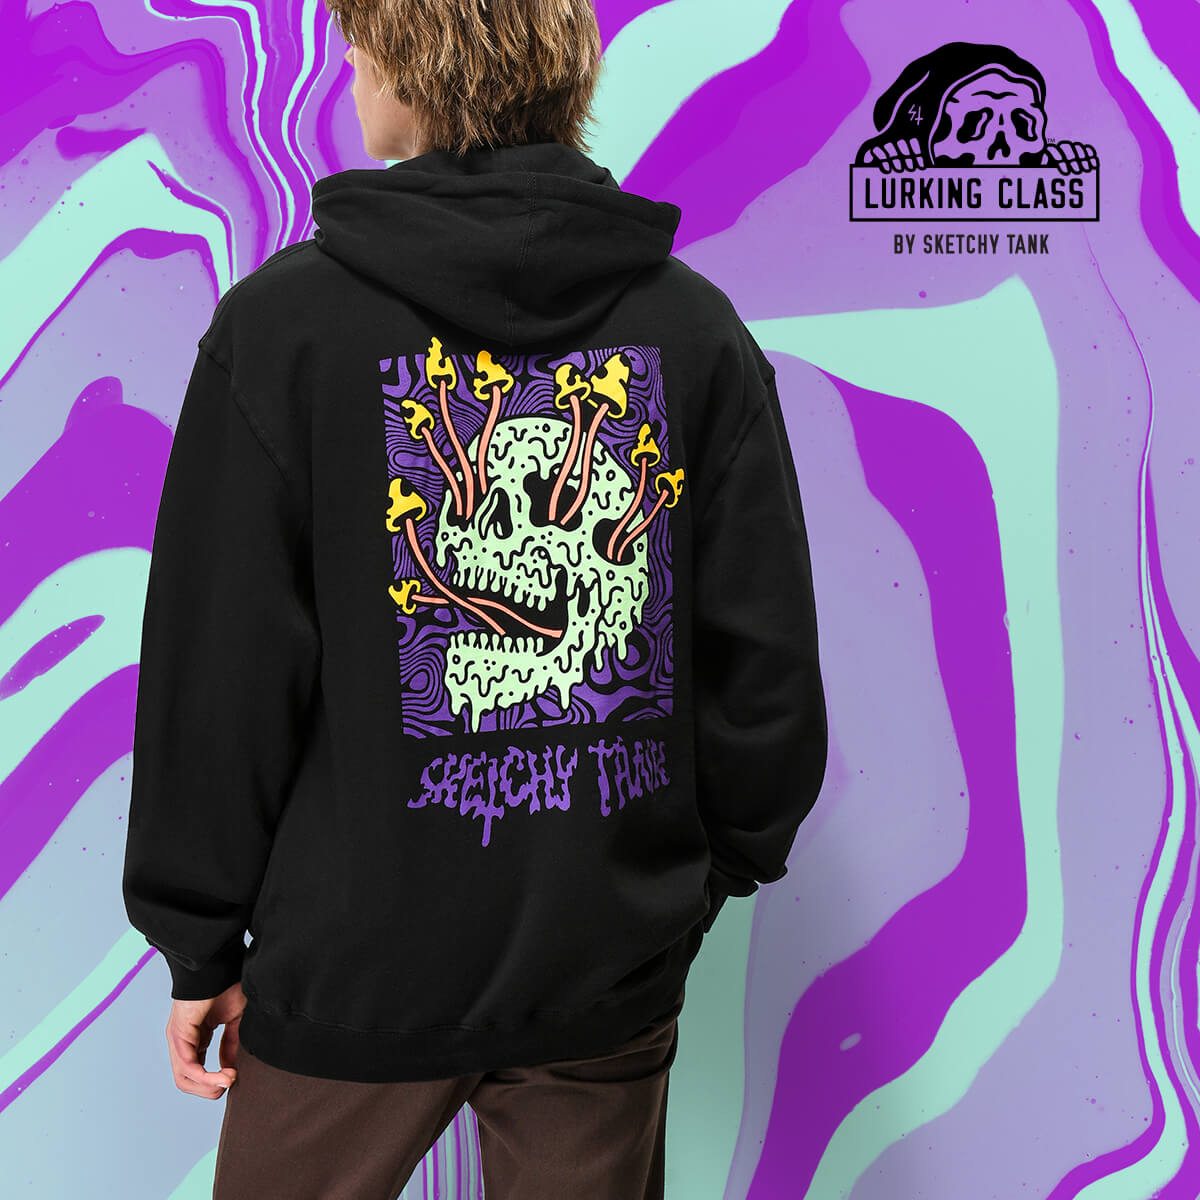 LURKING CLASS BY SKETCHY TANK NEW ARRIVALS